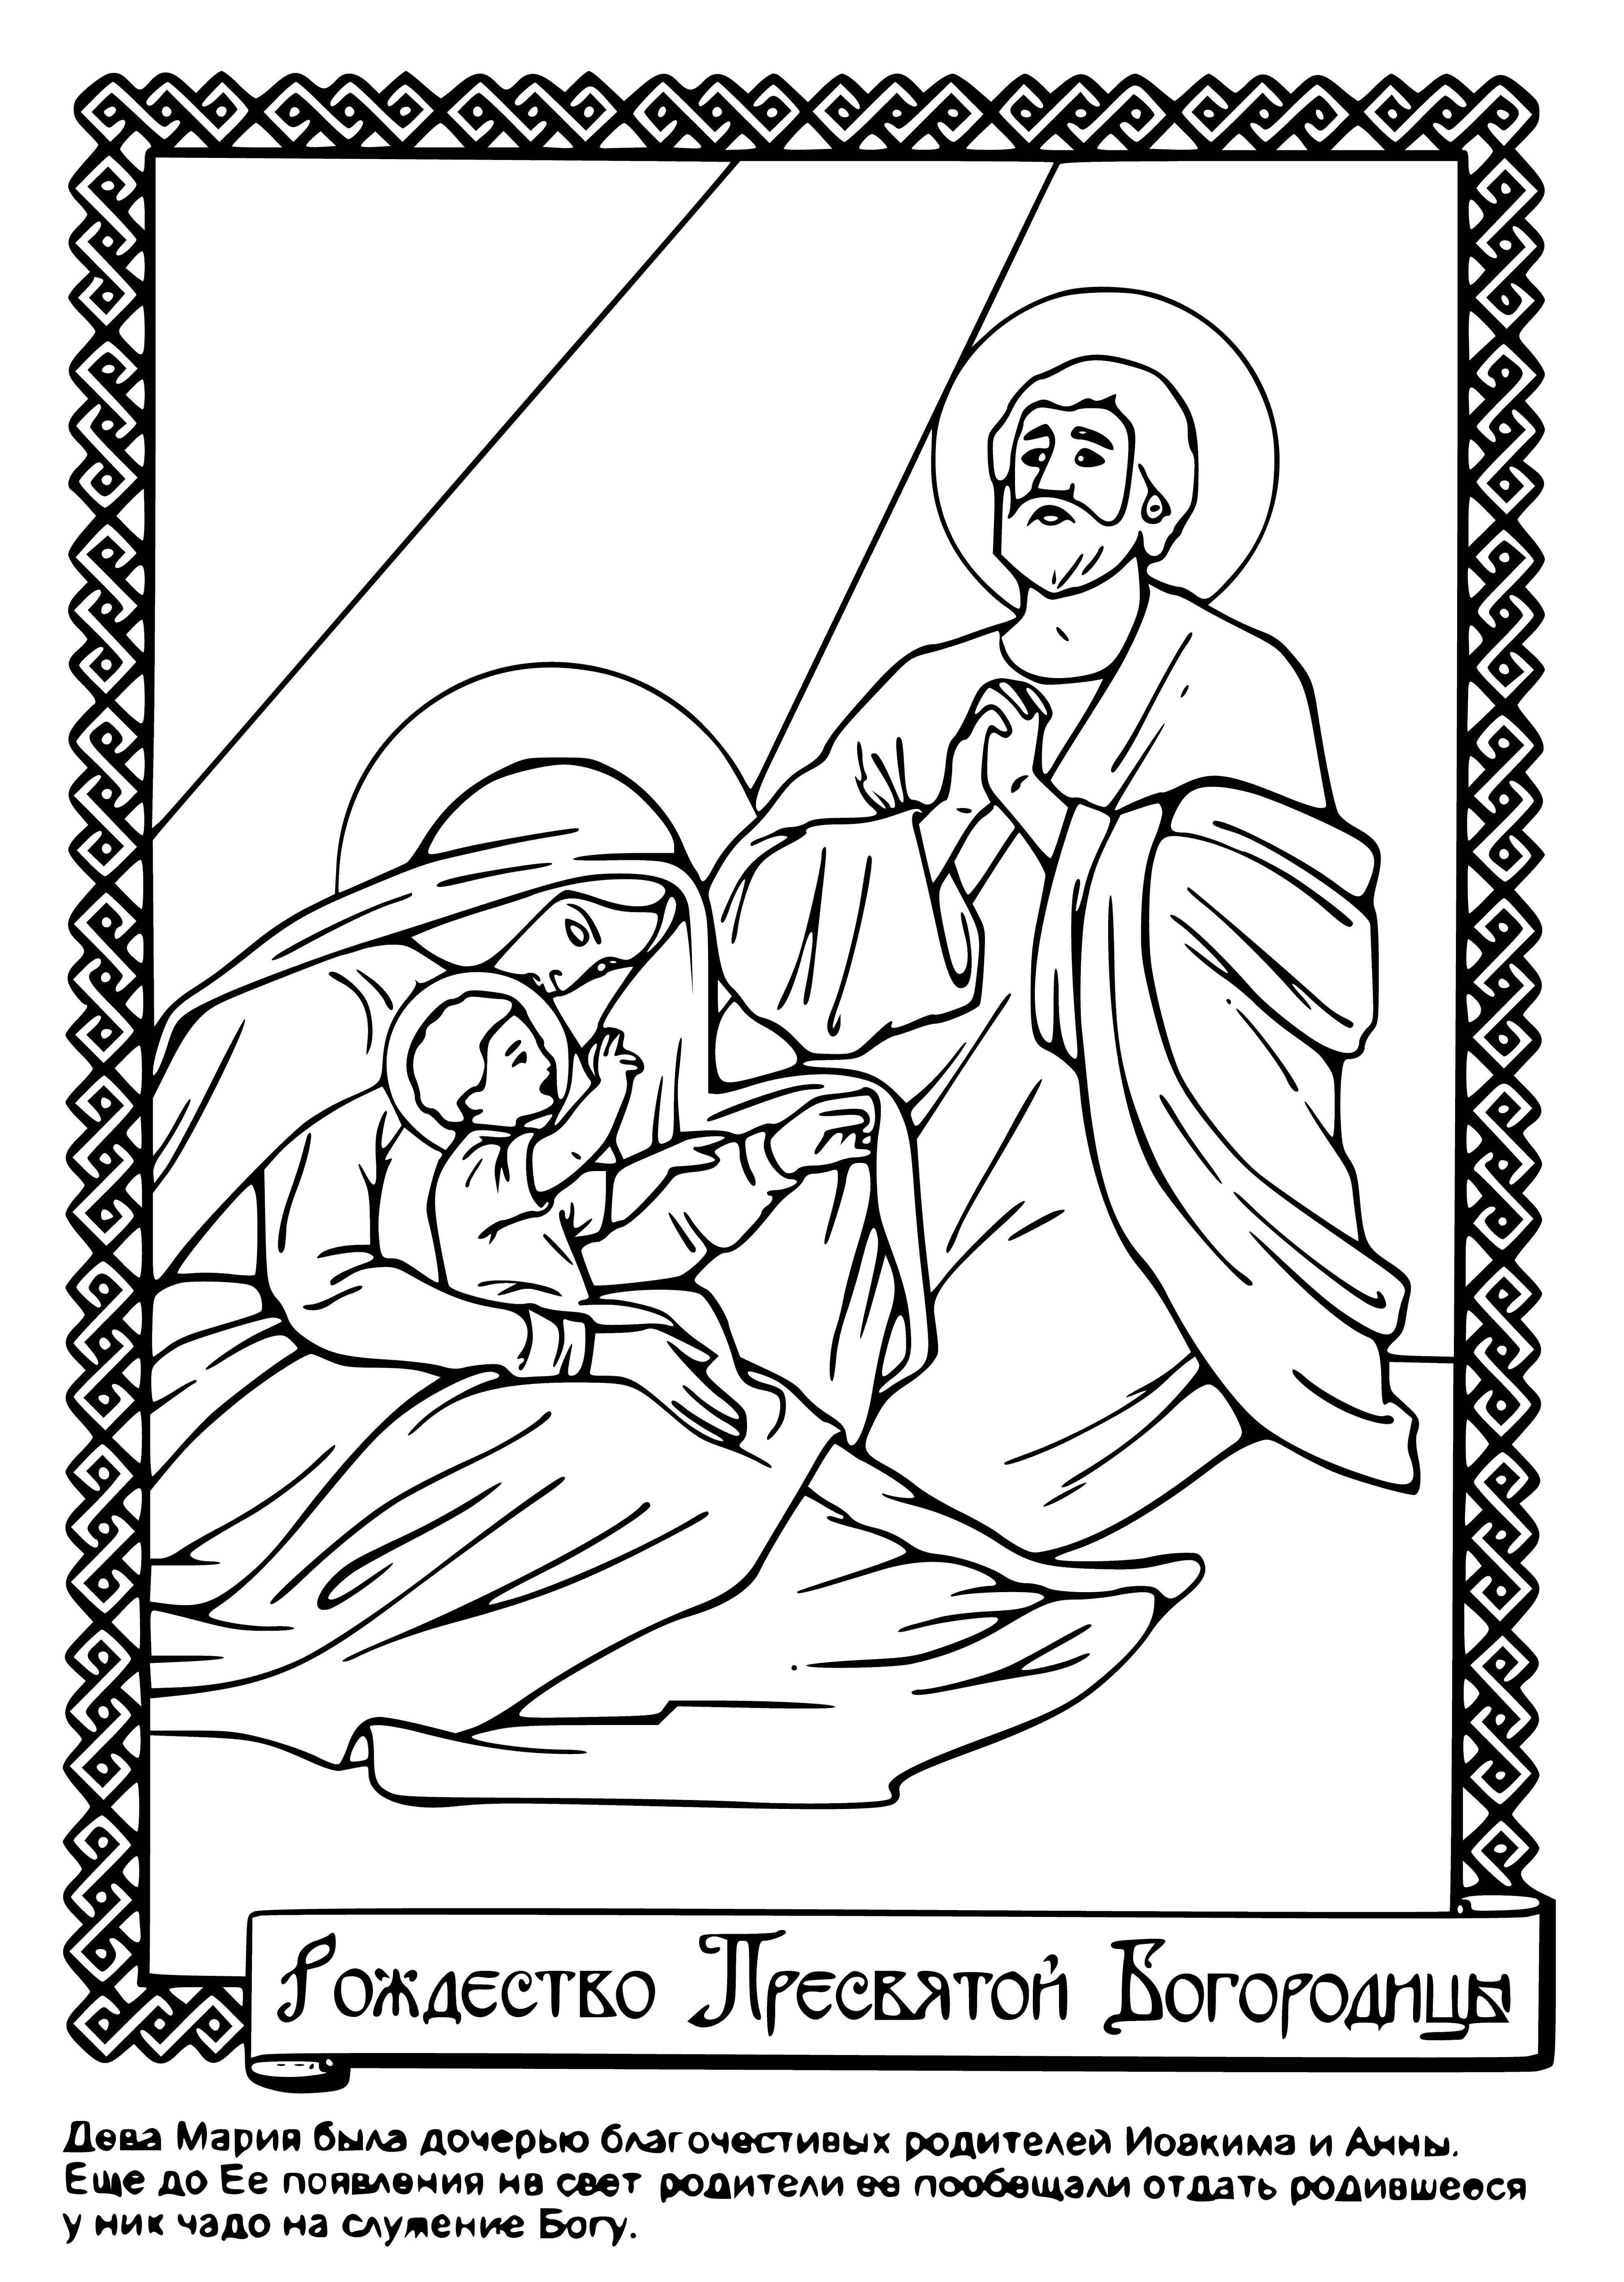 coloring page: Woman in blue robe holding a baby, surrounded by joyous crowd, city in background.